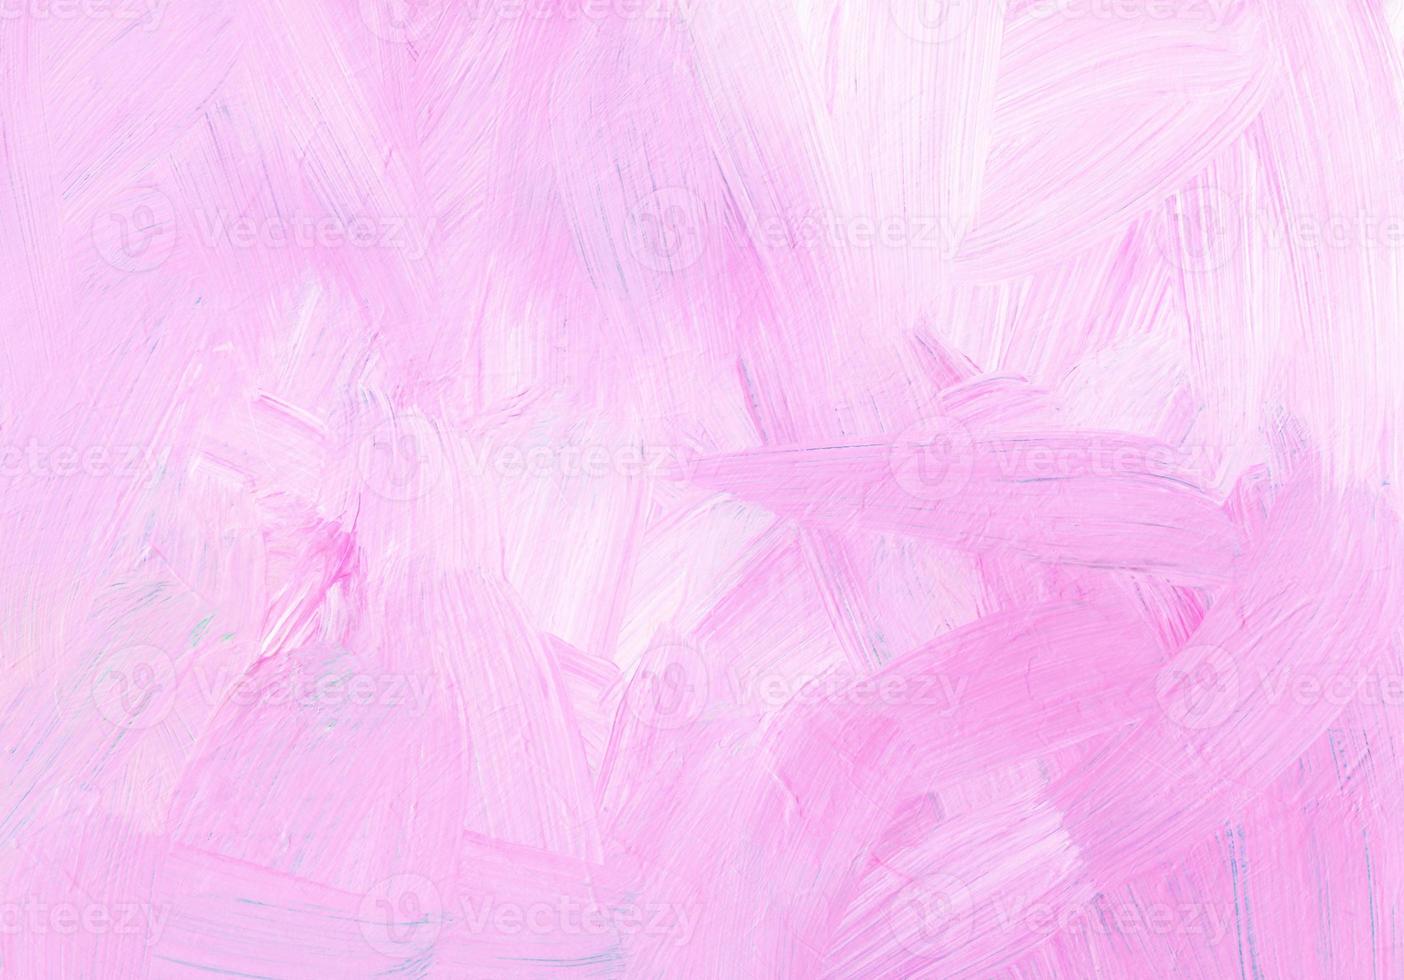 Abstract art pink and white background. Hand drawn pastel oil painting. Textured light brush strokes of paint on paper. Contemporary art. Modern artwork. photo